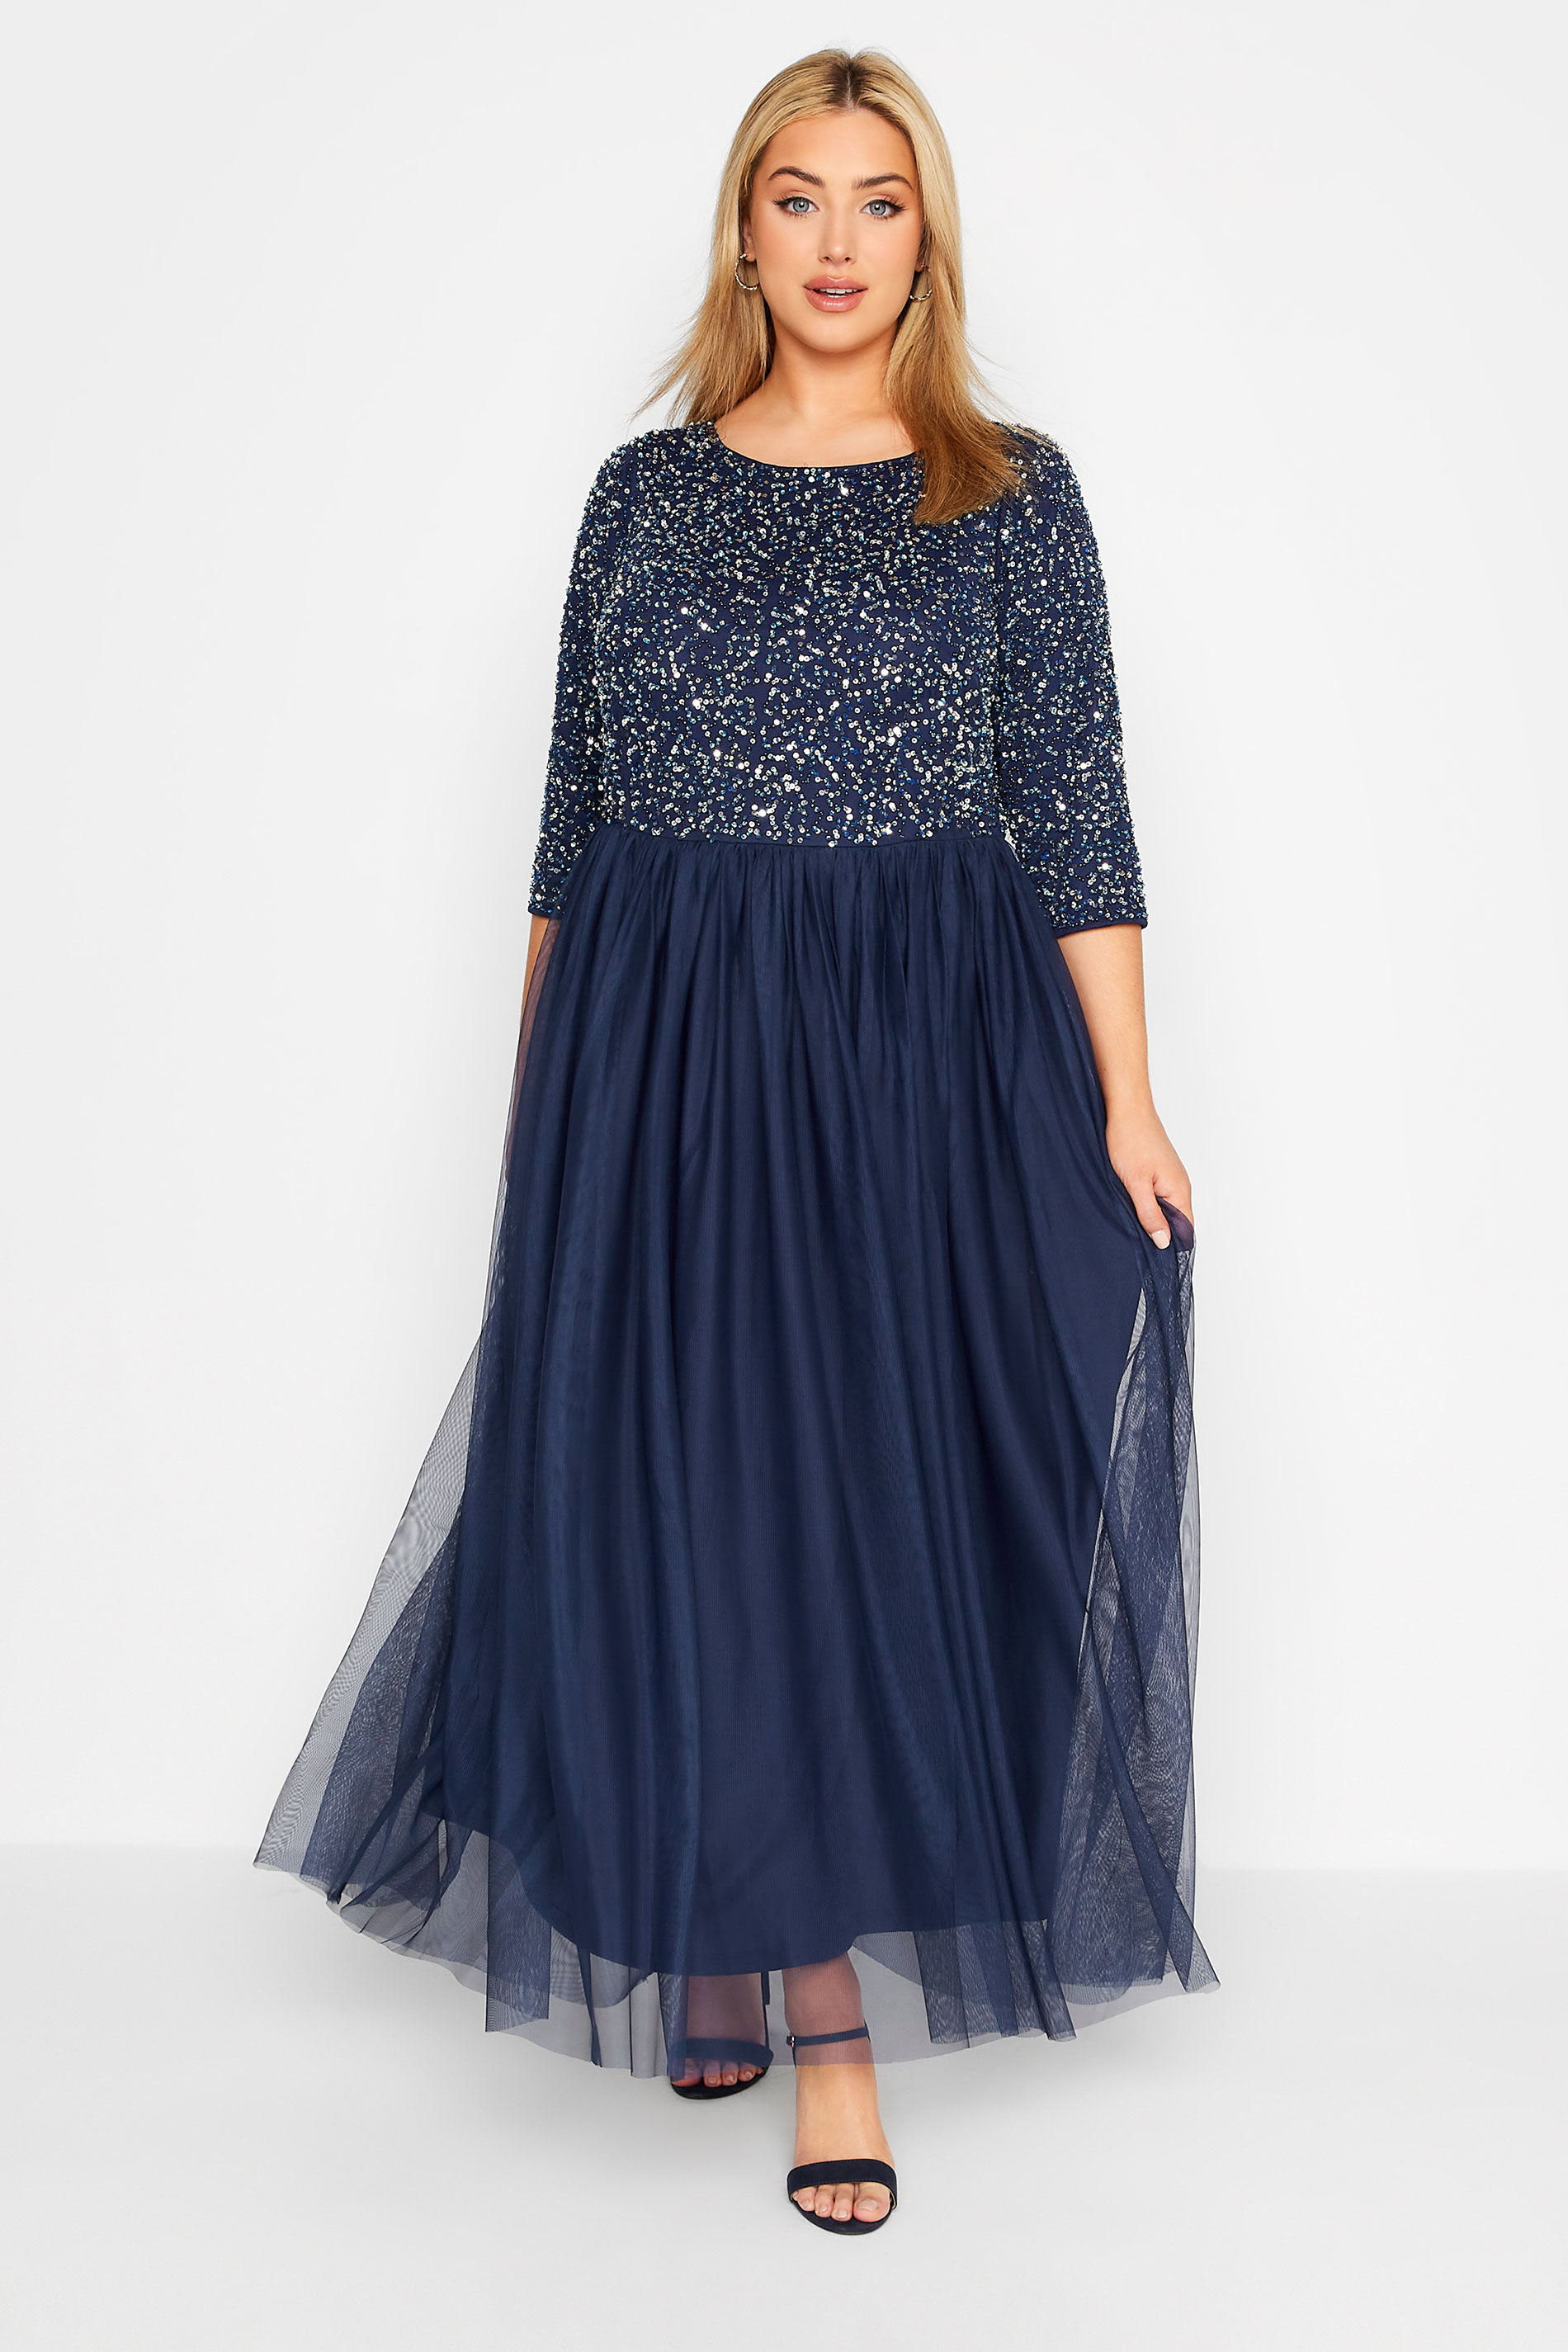 LUXE Plus Size Navy Blue Sequin Hand Embellished Maxi Dress | Yours Clothing  2